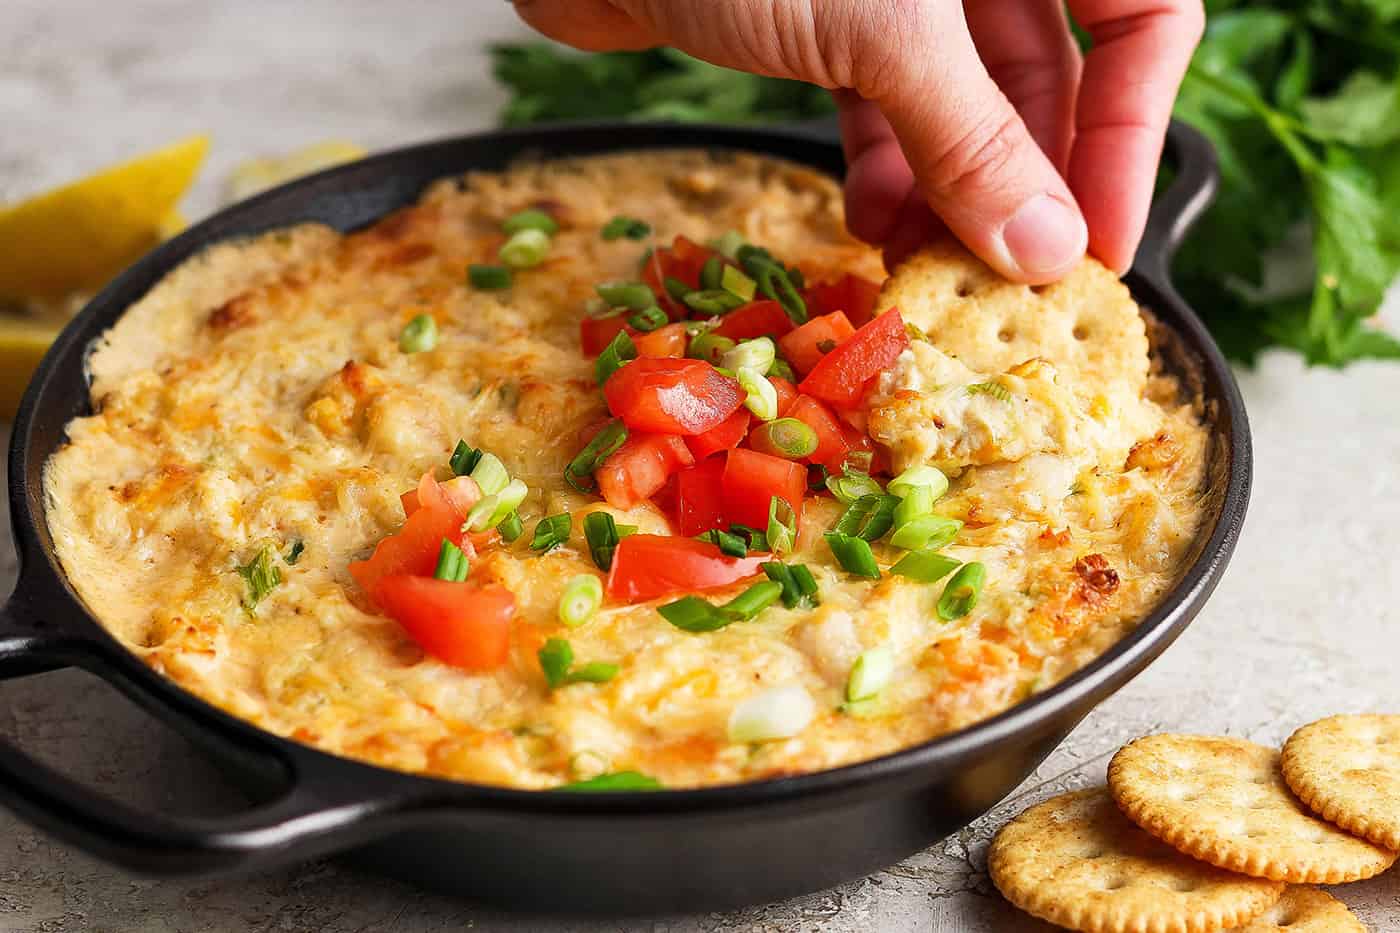 A hand dips a cracker into a tomato-topped bowl of shrimp and crab dip.